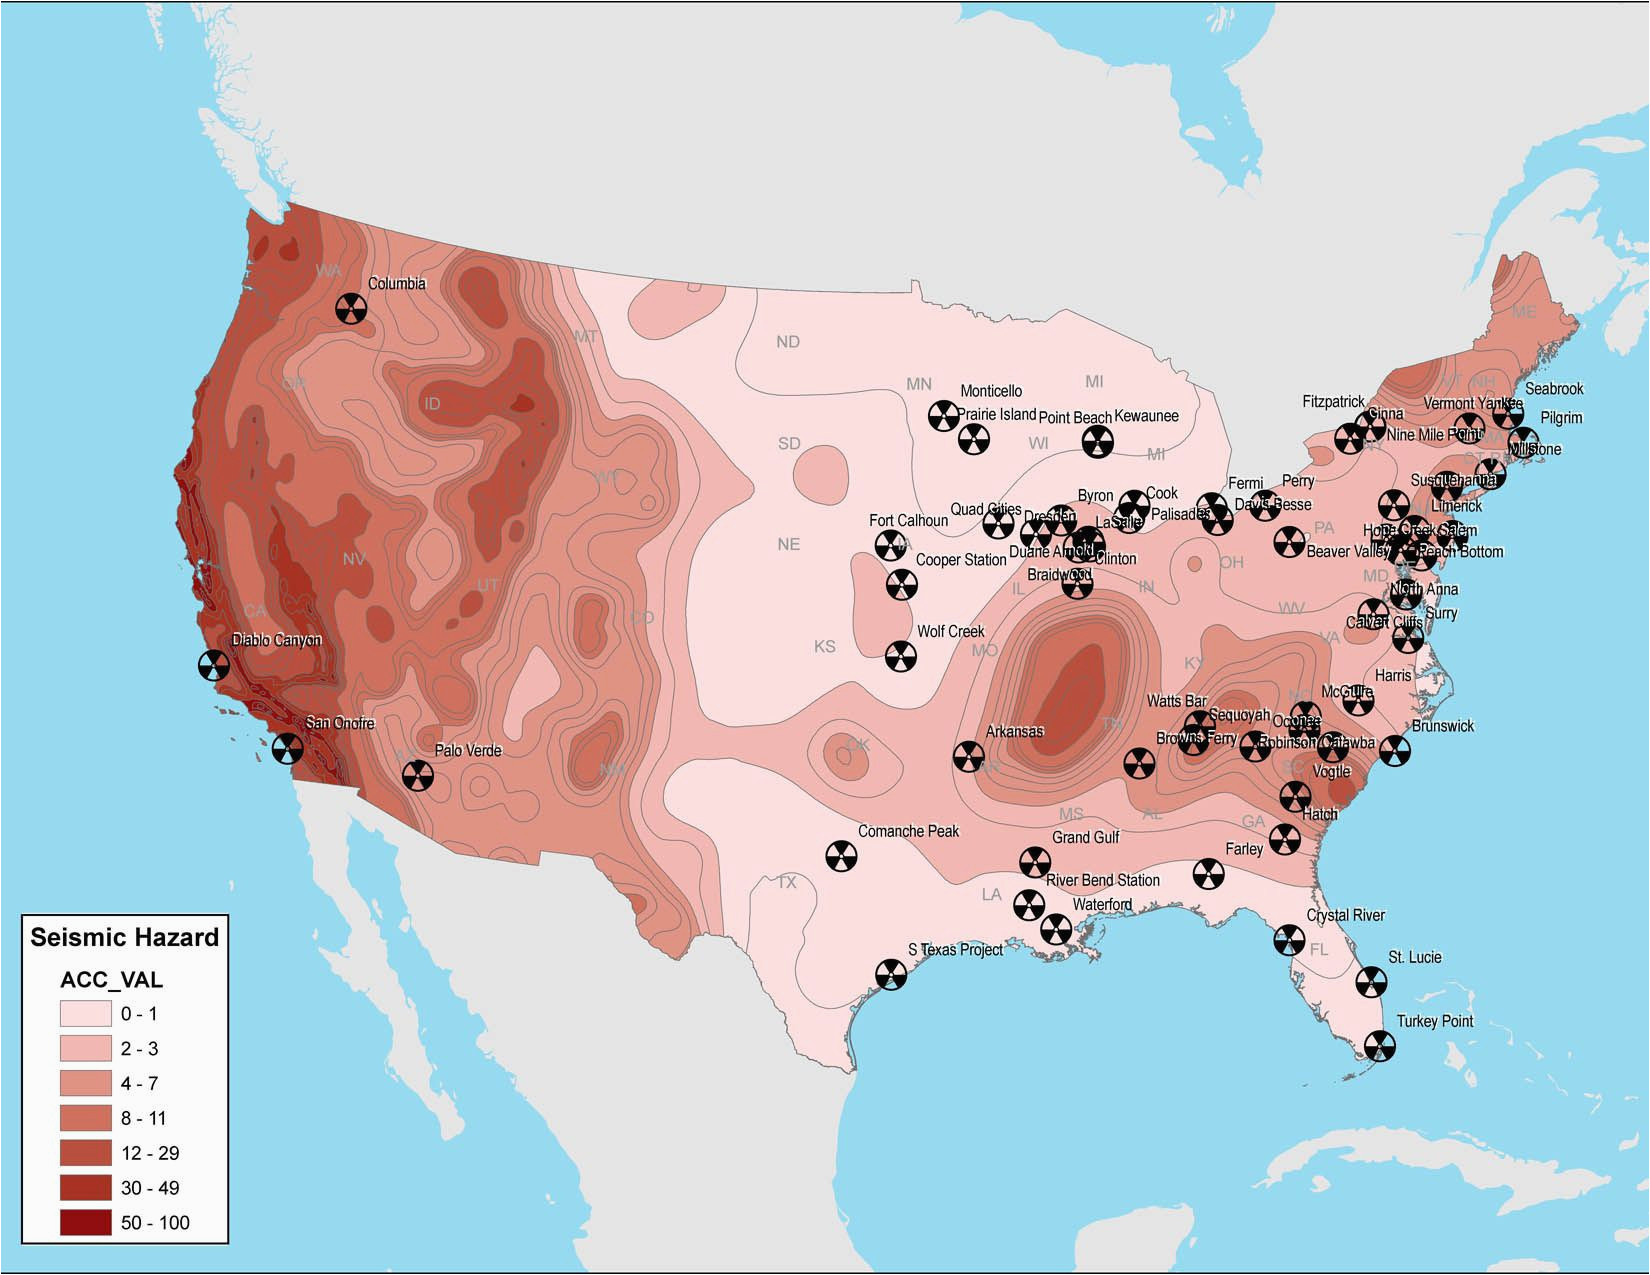 map of nuclear power plants and seismic hazards in the united states